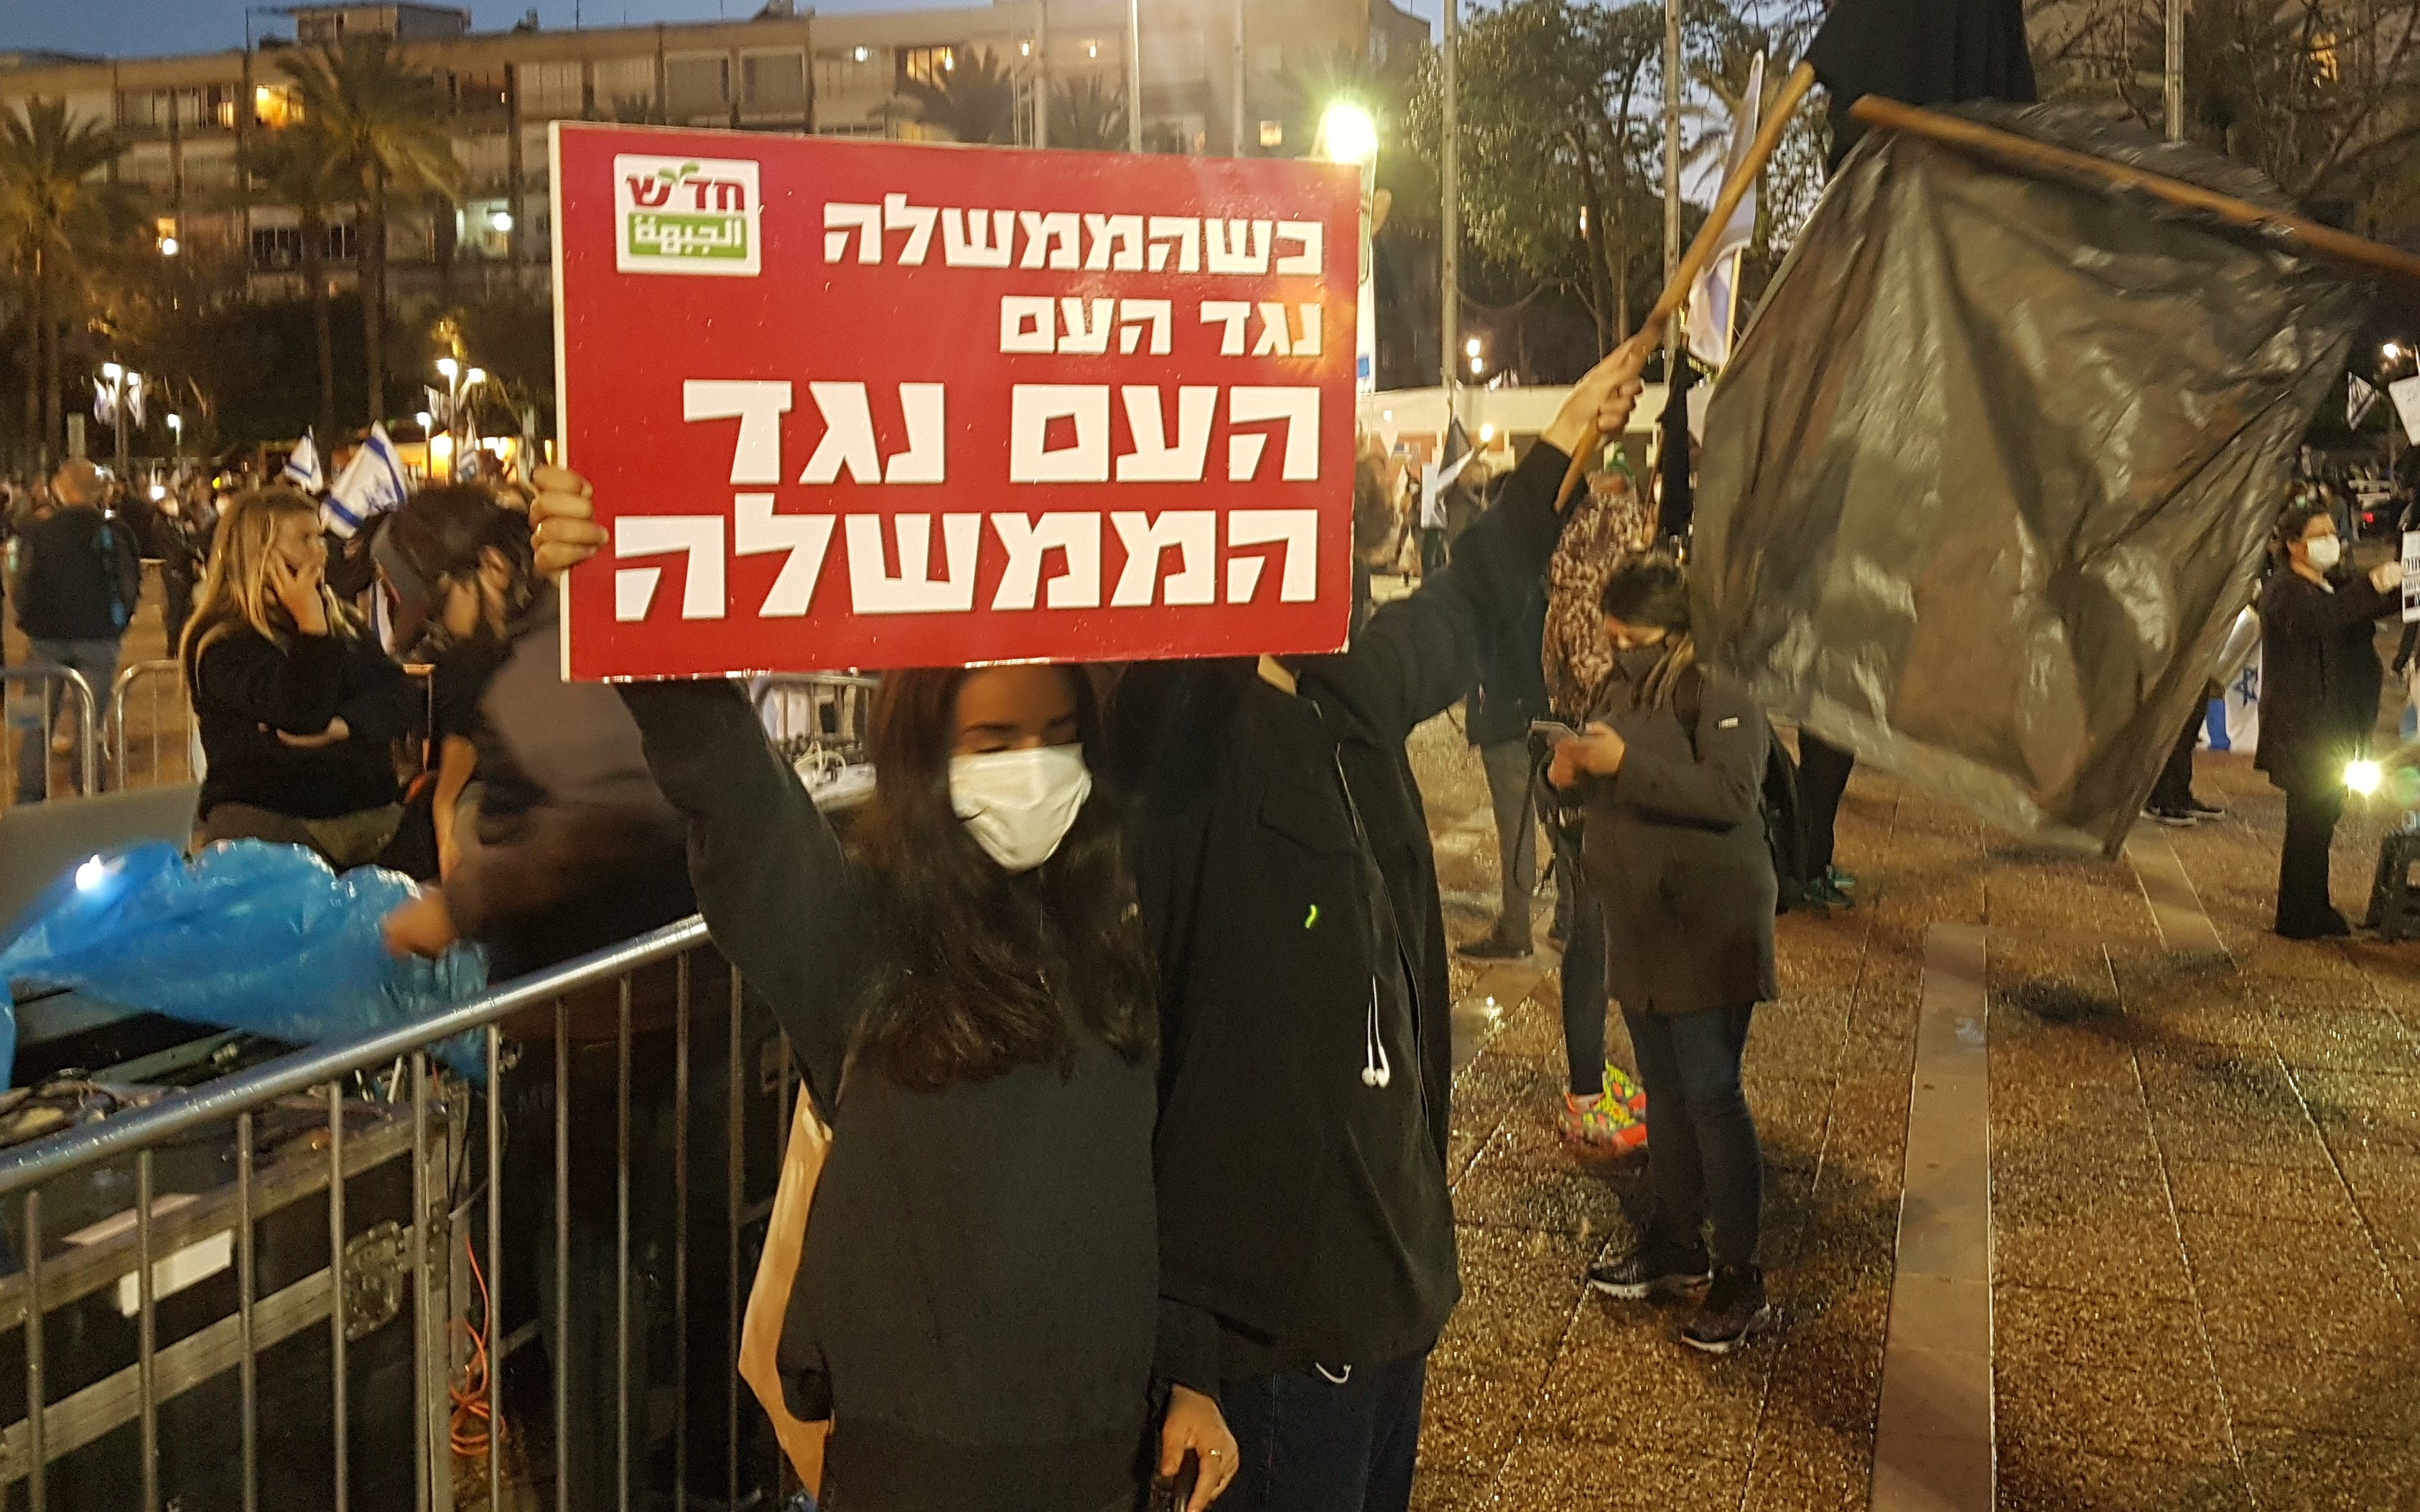 Two of the Hadash activists who participated in the demonstration organized by the Black Flag Movement on Saturday evening, April 25, Tel Aviv's Rabin Square; the Hadash placard reads "When the government is against the people, the people are against the government."